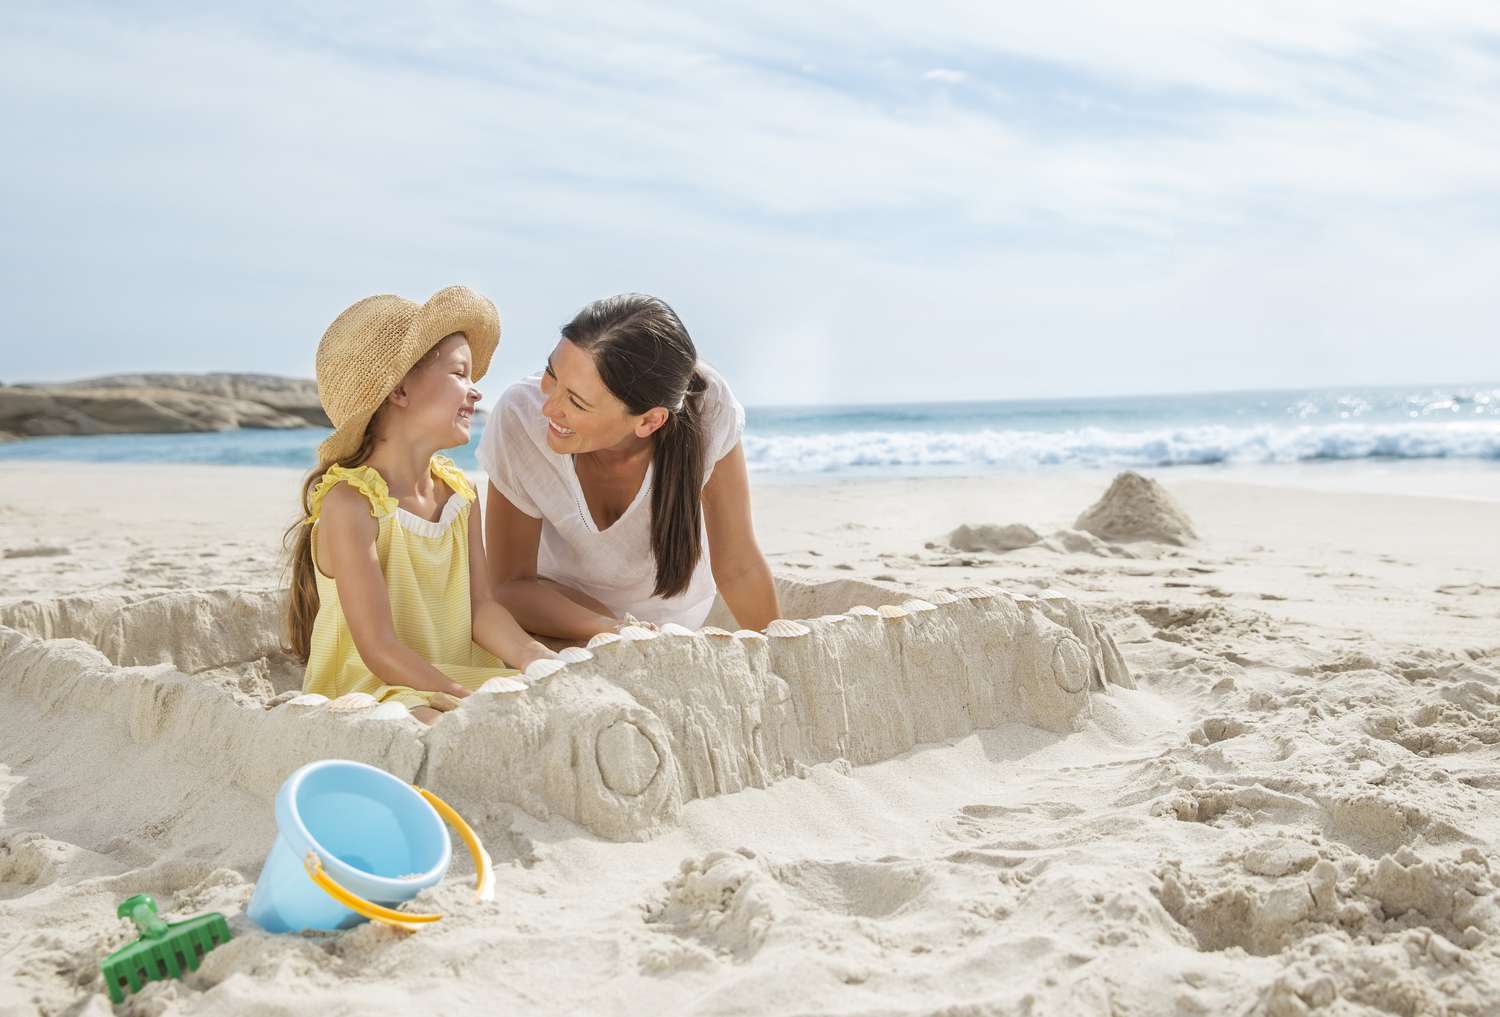 Mom and Daughter Building a Sandcastle on the Beach